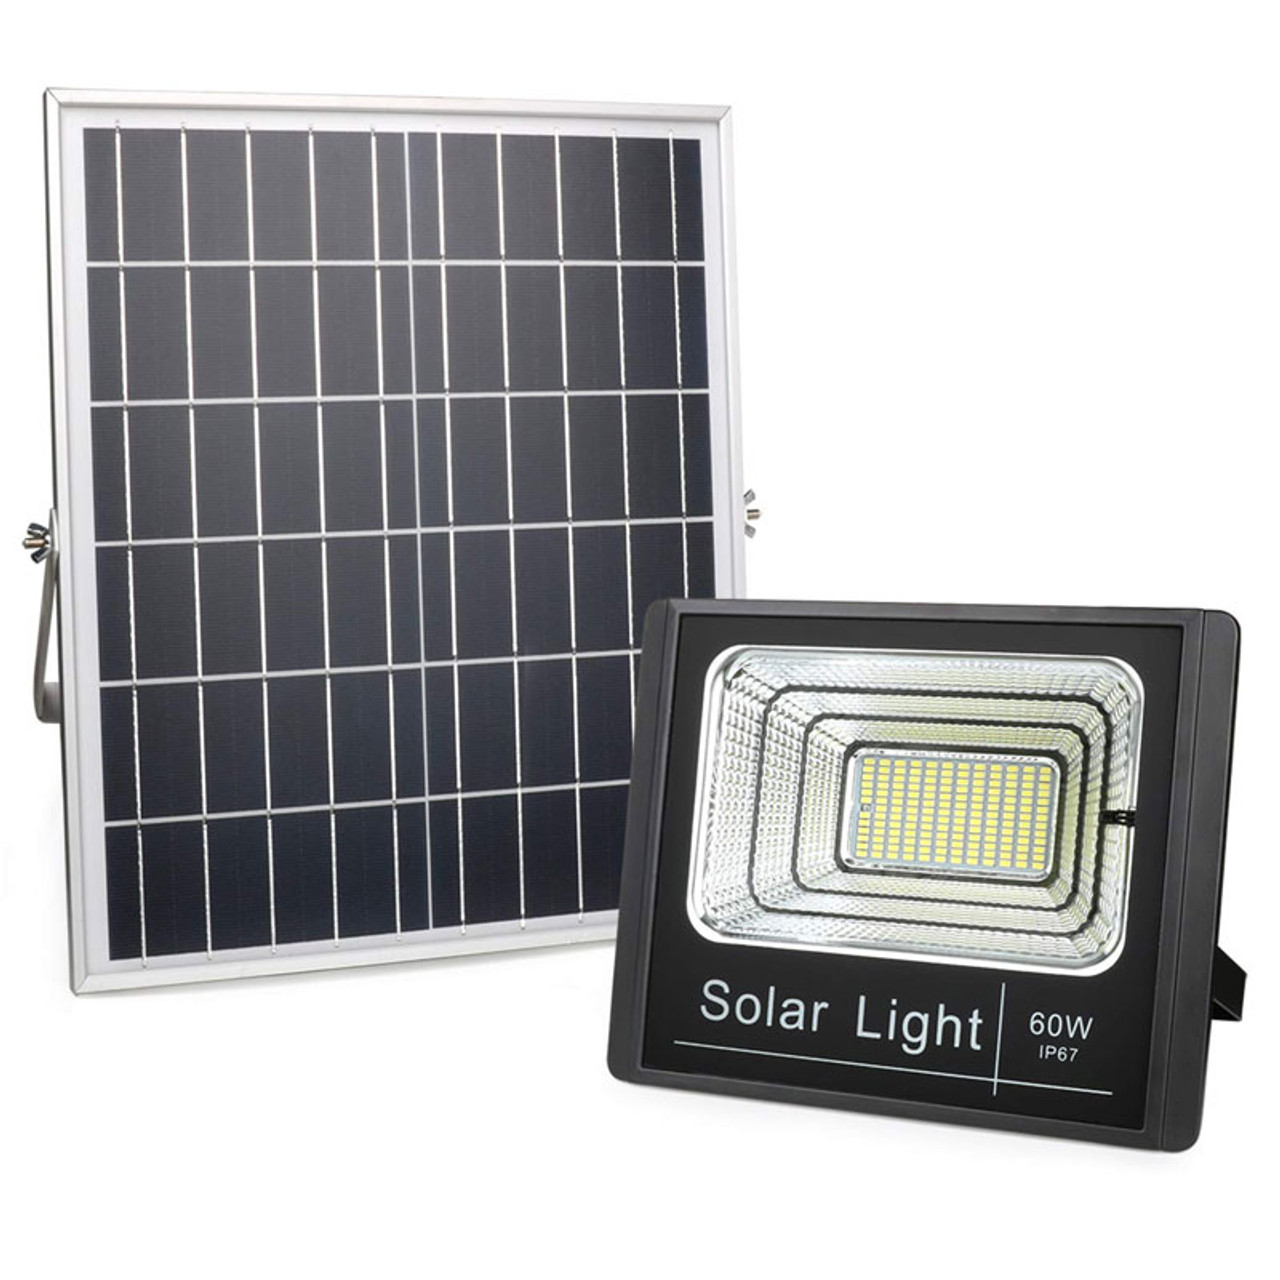 LED Solar Powered Flood Light, High Output 60 Watt, 2,700 Lumens With Solar  Panel, Dimmable Dusk To Dawn On Off Sensor, IP67, Five Year Warranty LED  Global Supply